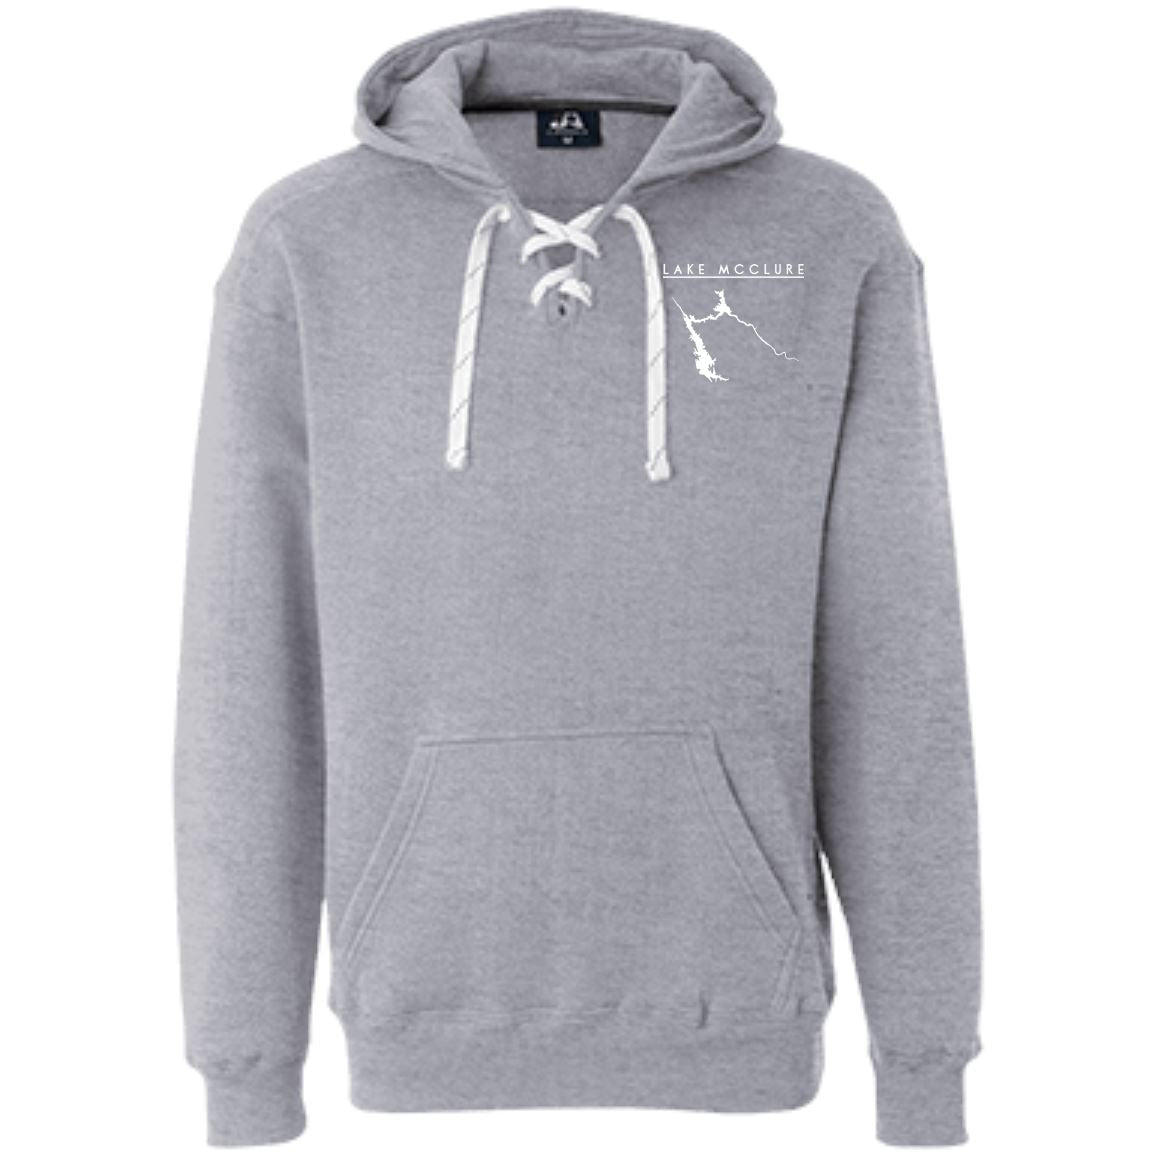 Lake McClure Embroidered Heavyweight Sport Lace Hoodie - Houseboat Kings